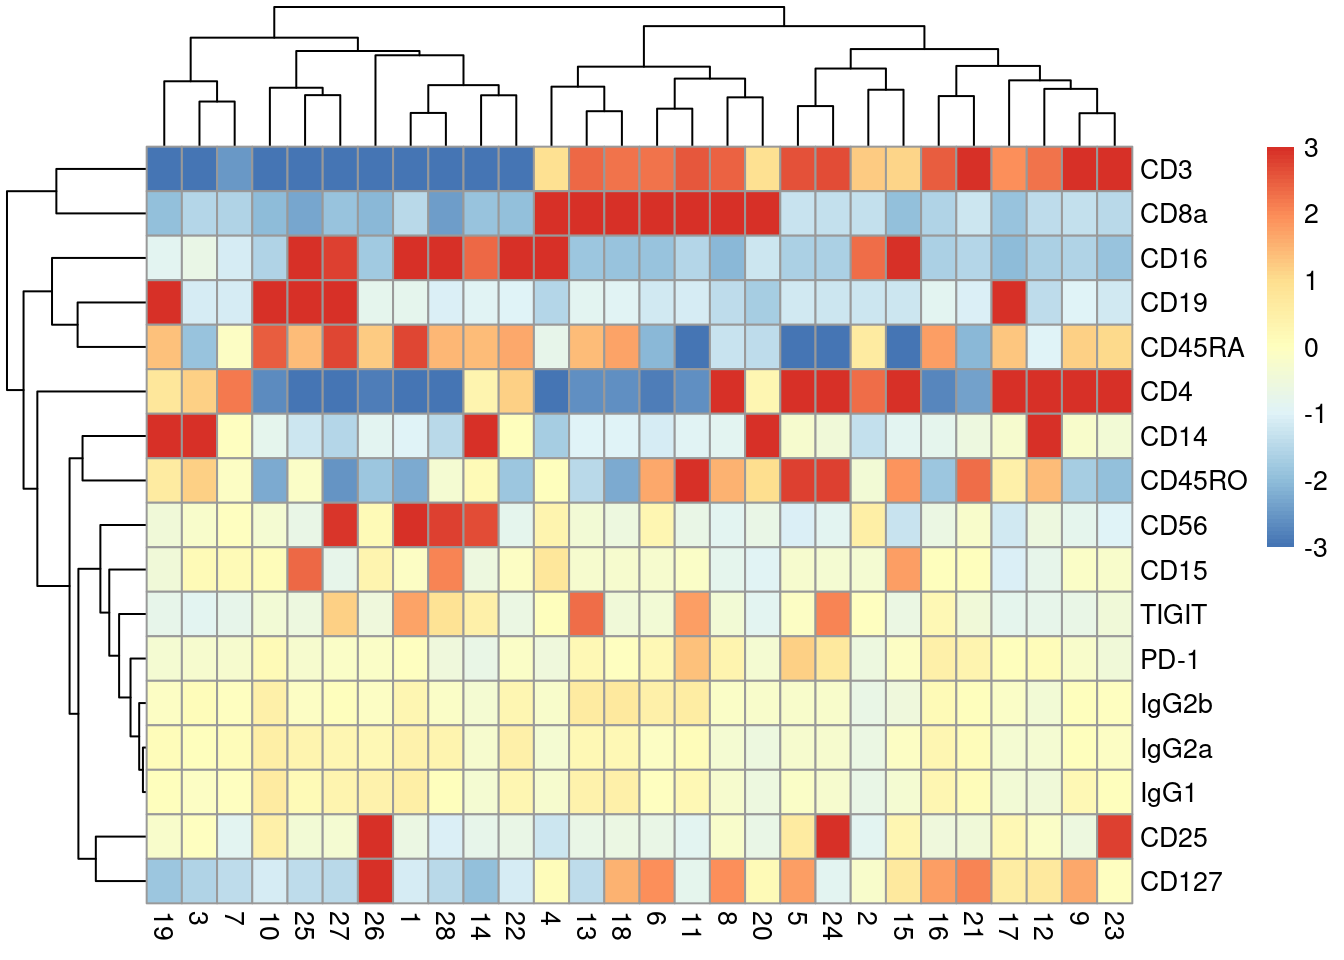 Heatmap of the average log-normalized abundance of each ADT in each cluster of the PBMC dataset. Colors represent the log~2~-fold change from the grand average across all clusters.